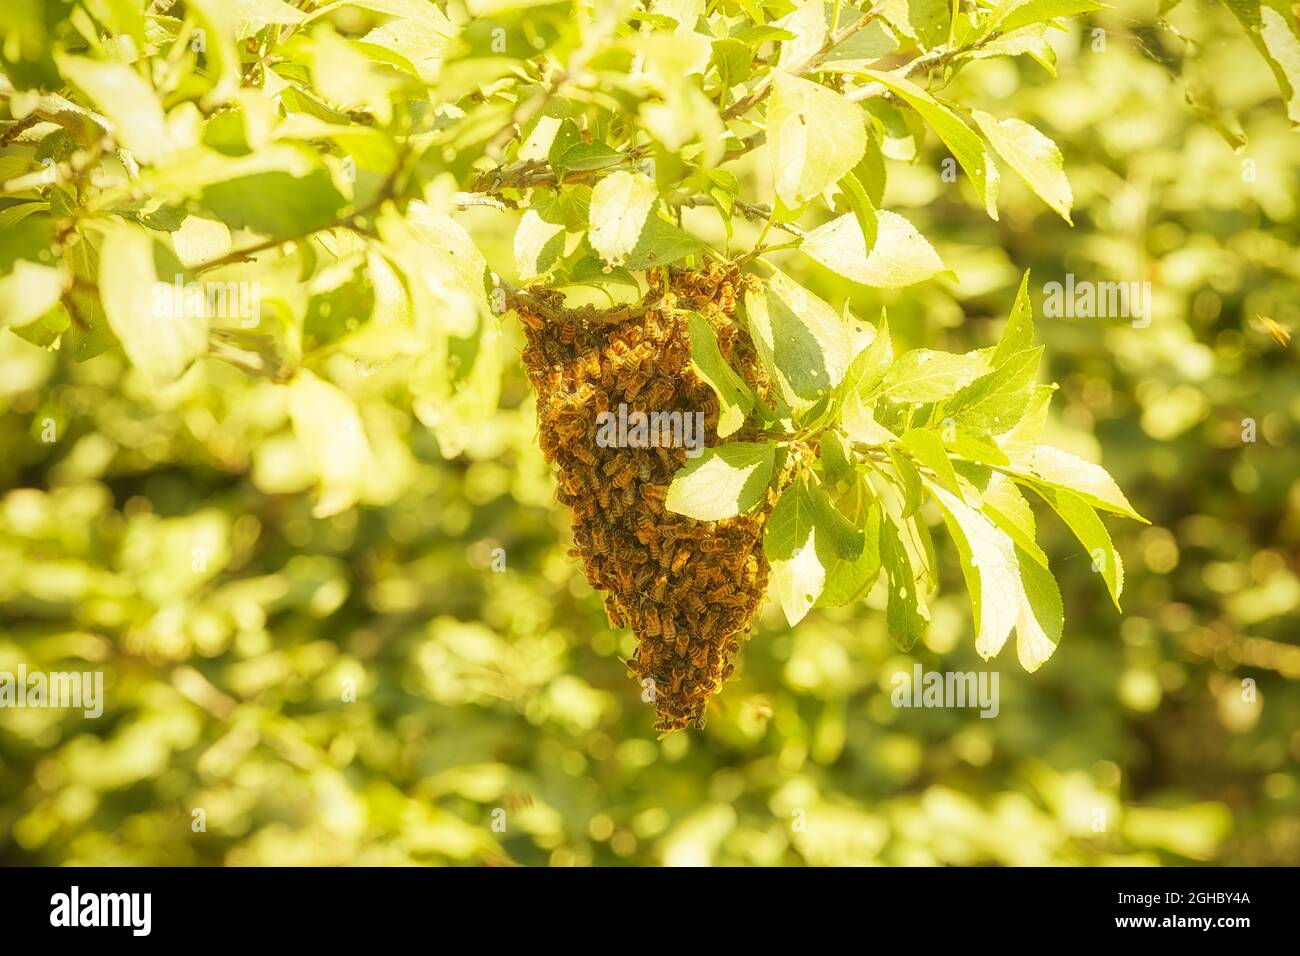 Small swarm of bees is grafted and hangs on a plum branch Stock Photo